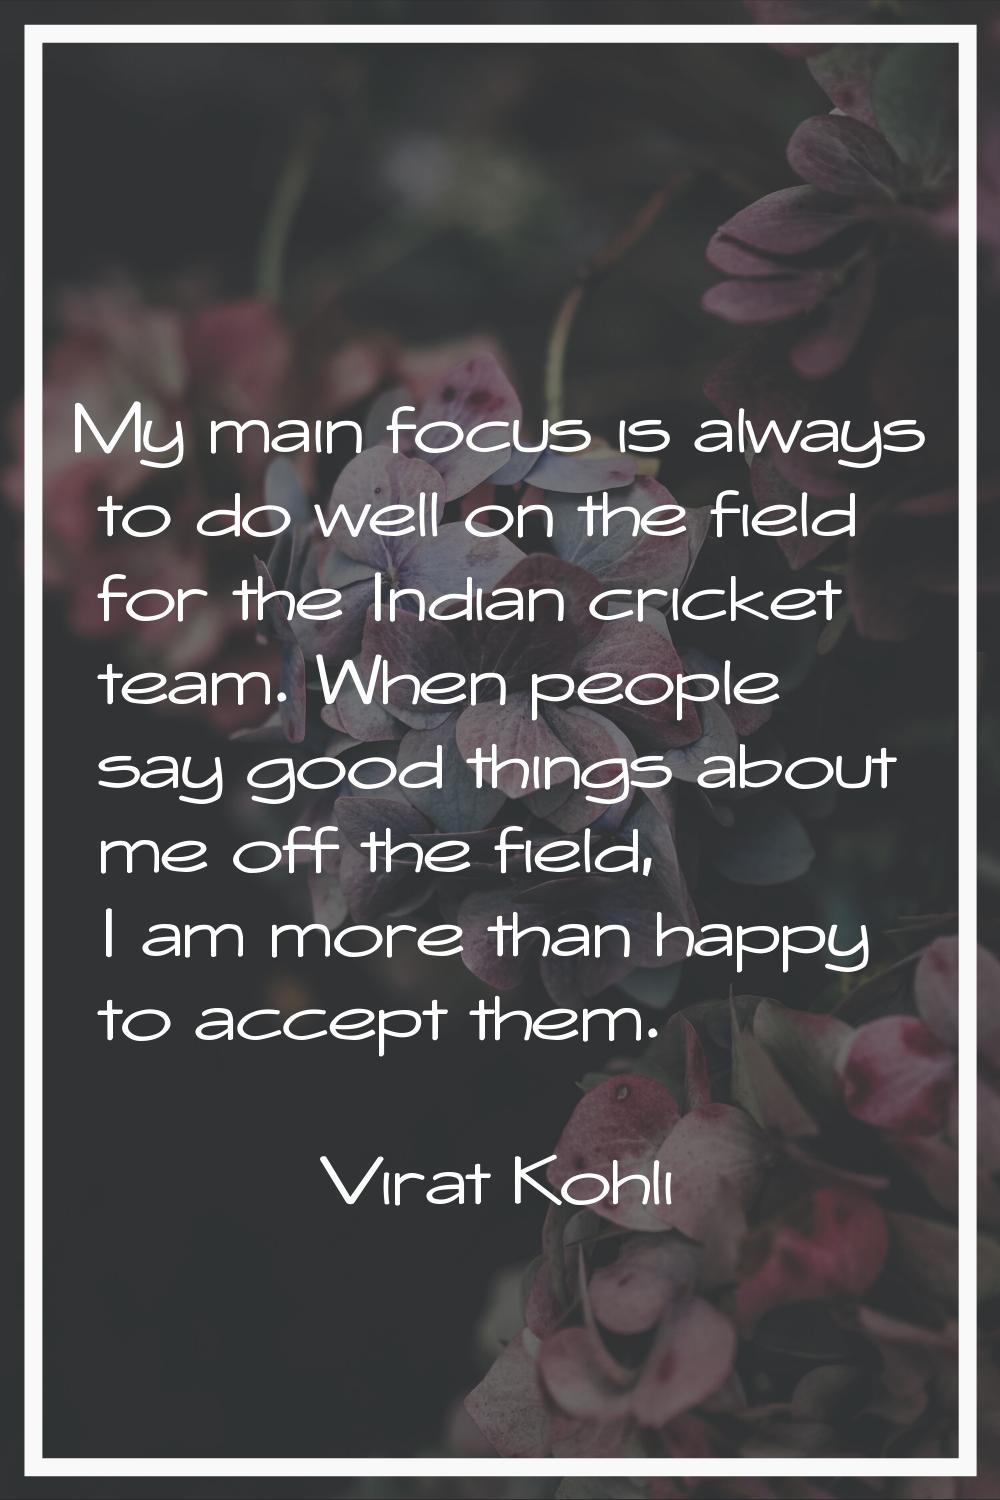 My main focus is always to do well on the field for the Indian cricket team. When people say good t